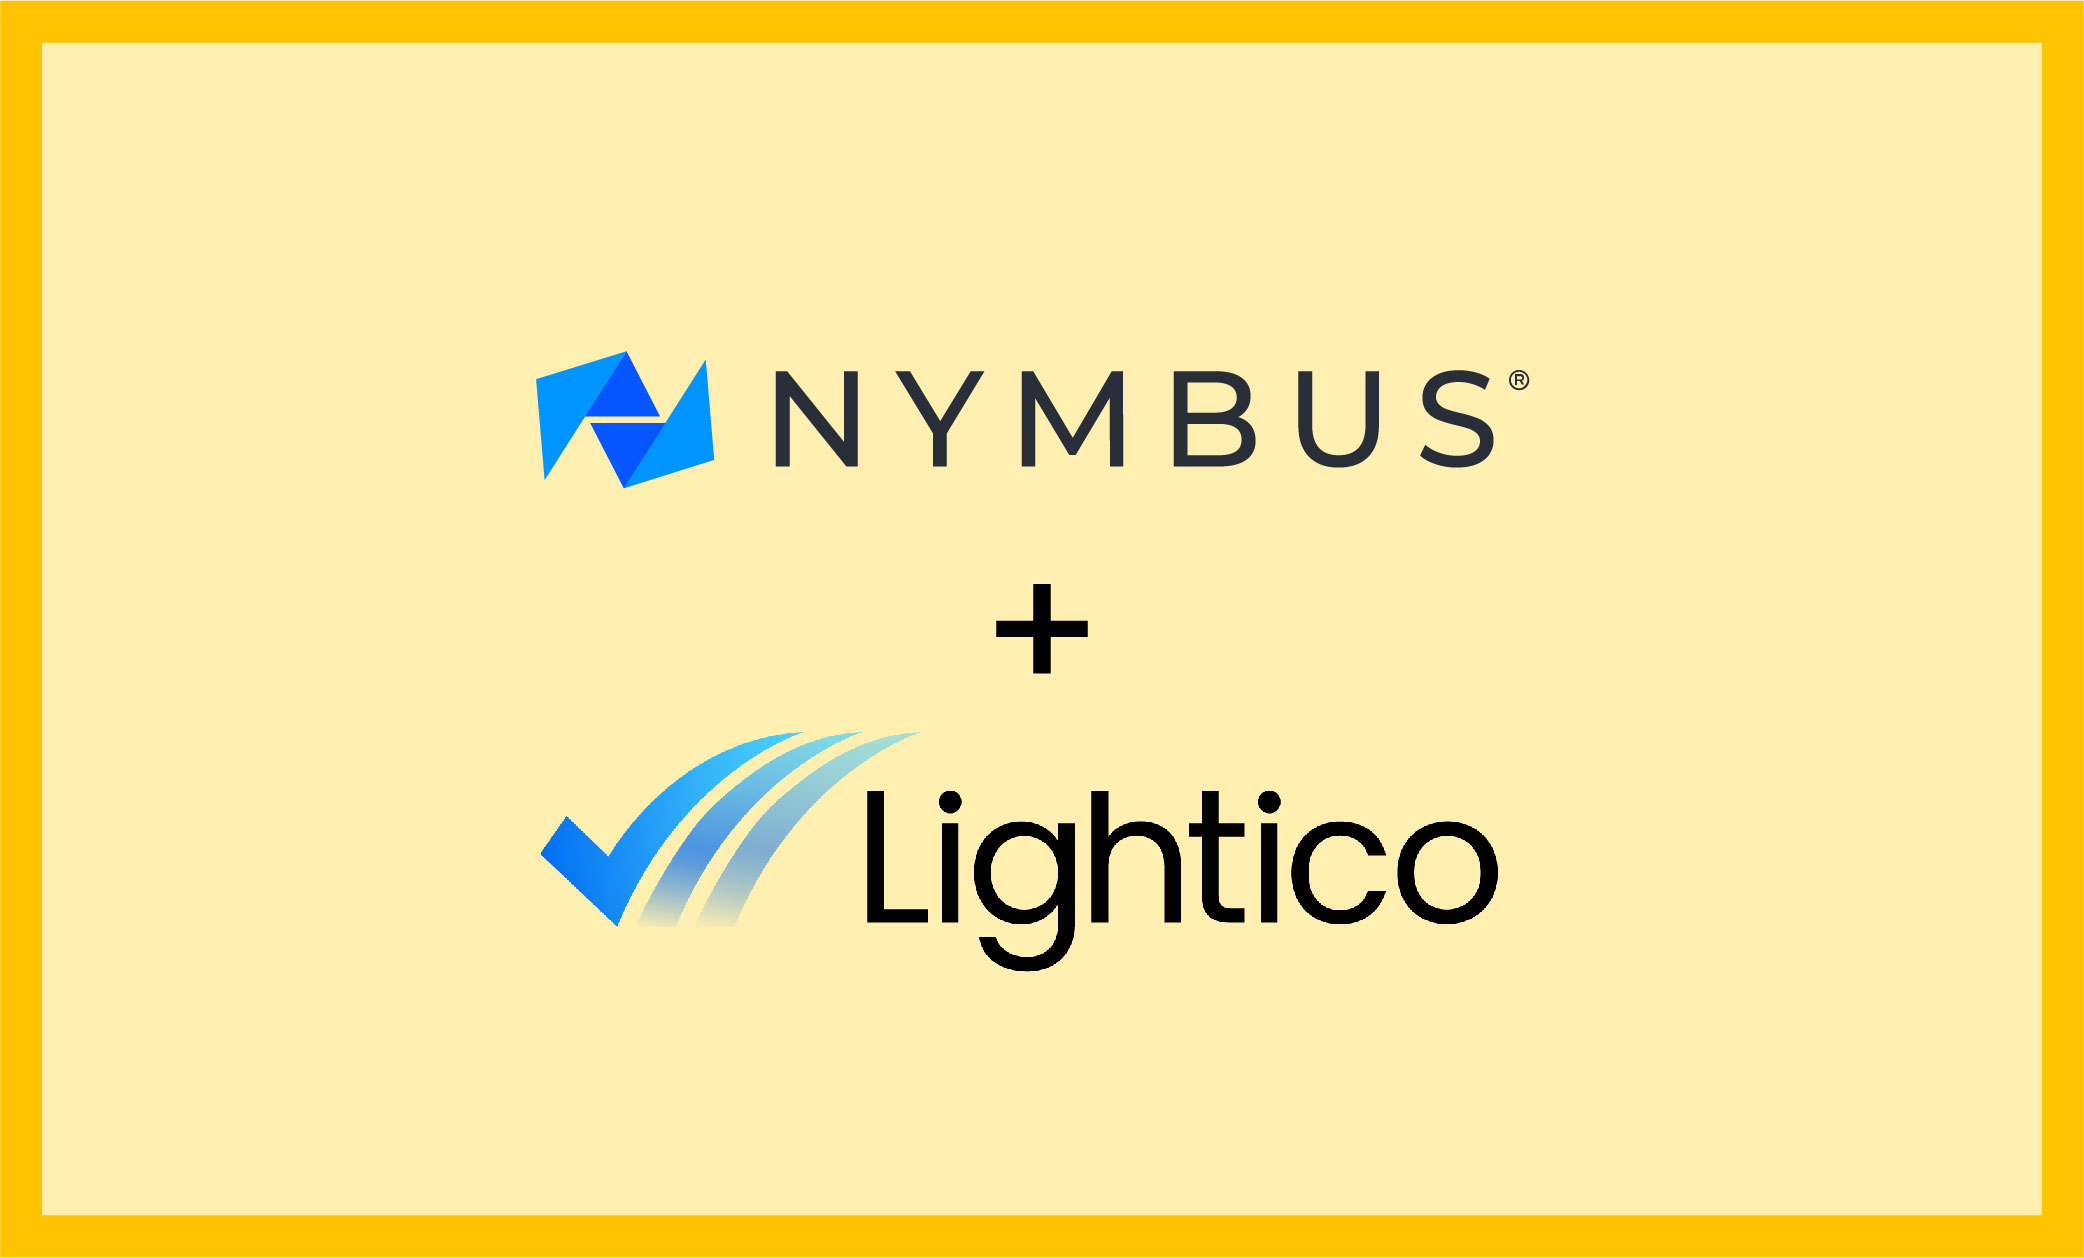 Lightico and Nymbus Partner to Digitize & Streamline Customer-Facing Banking Processes